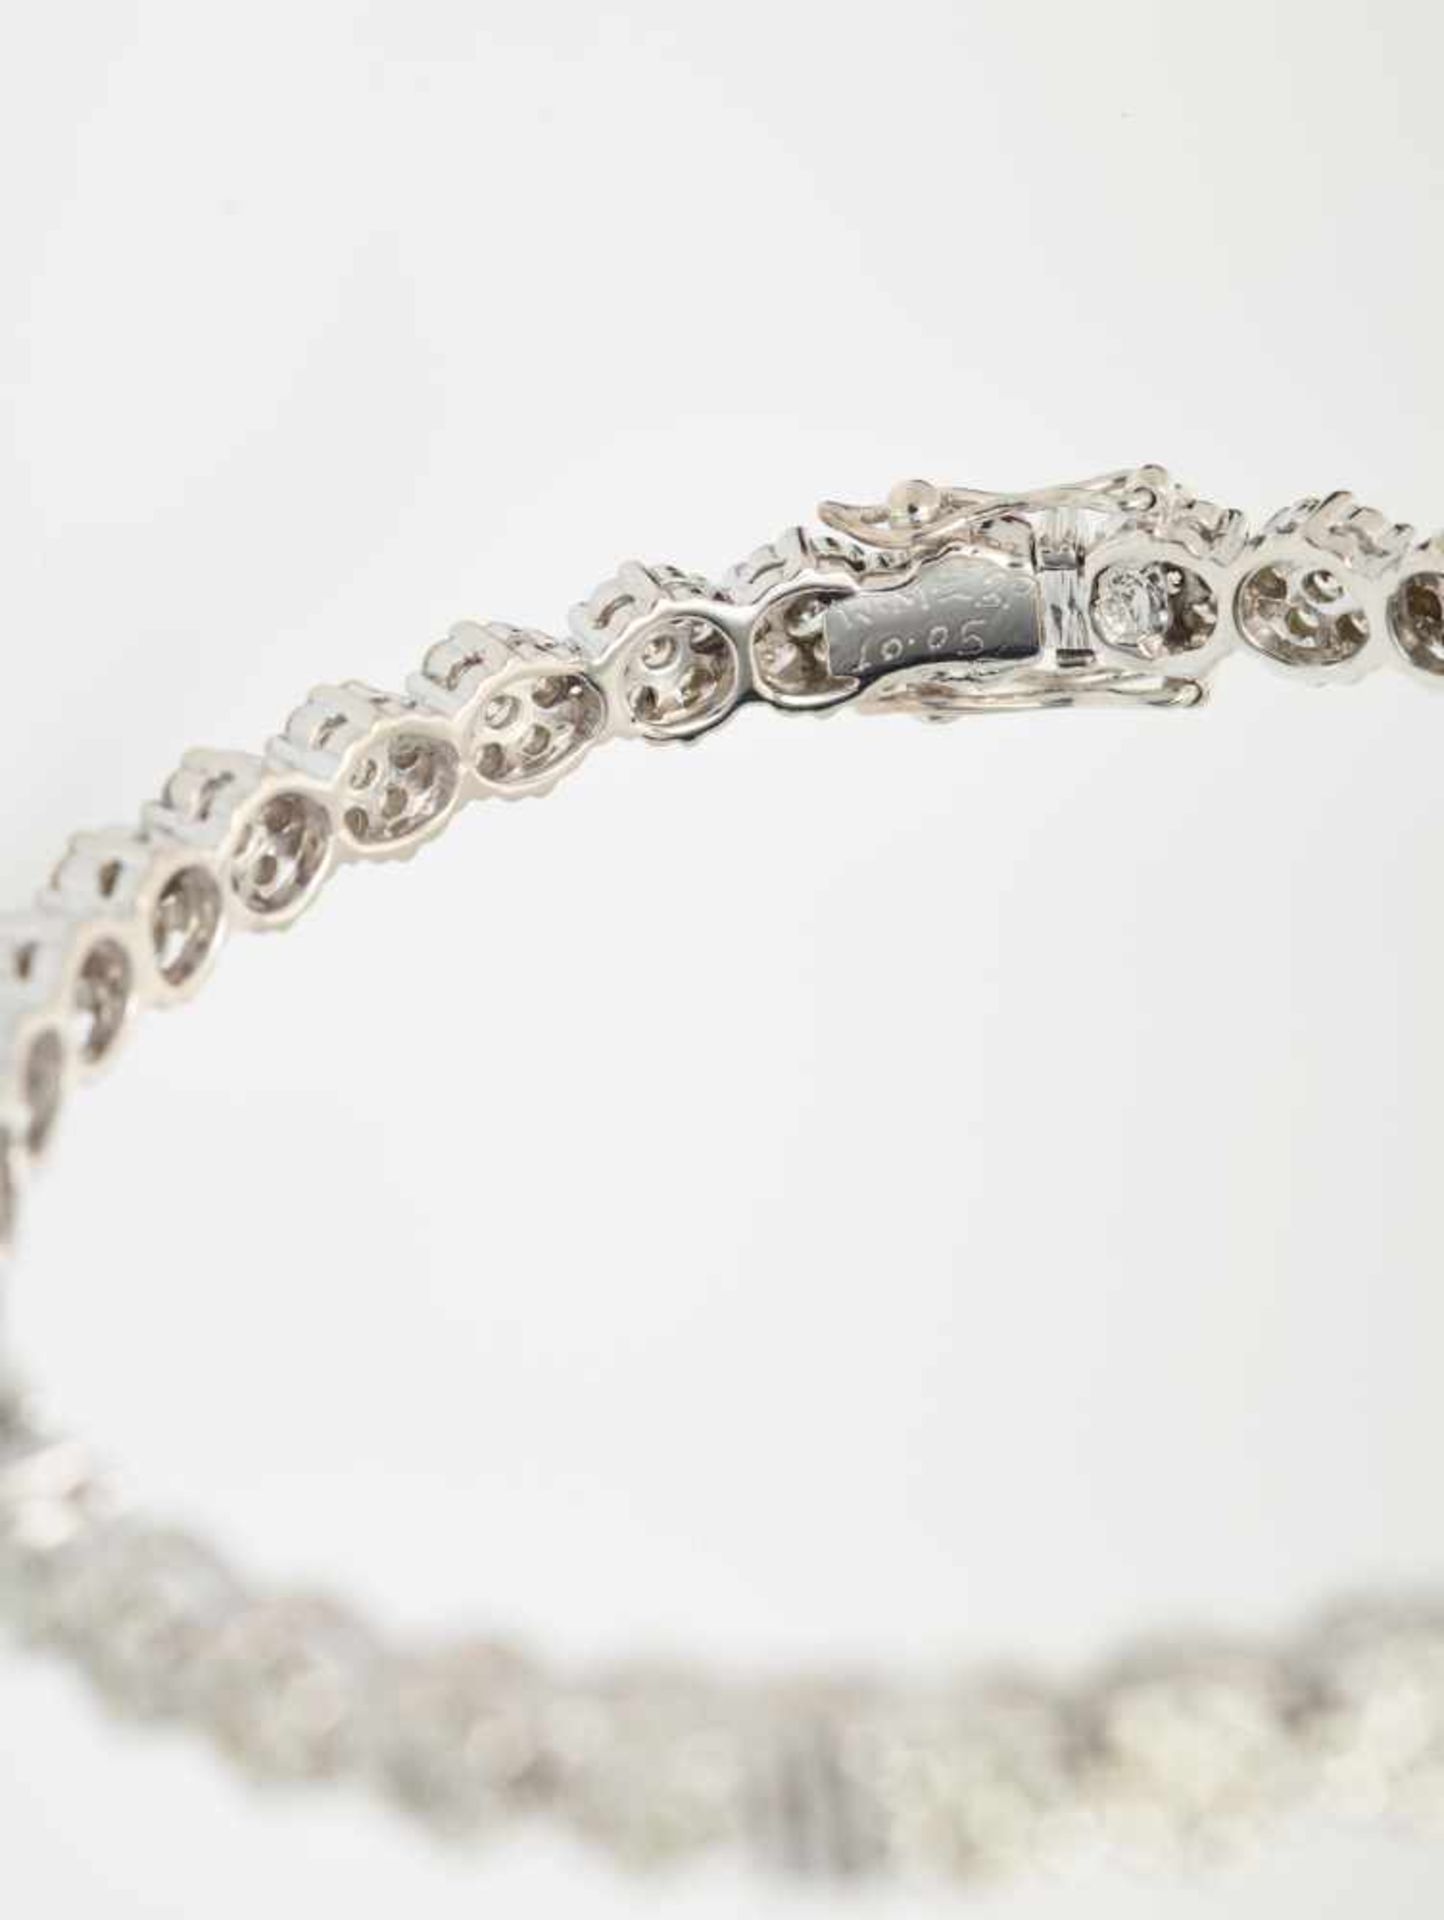 AN 18 CARAT GOLD BRACELET WITH 10 CARAT DIAMONDSHallmarked 18K and inscribed with the stone weight - Image 7 of 7